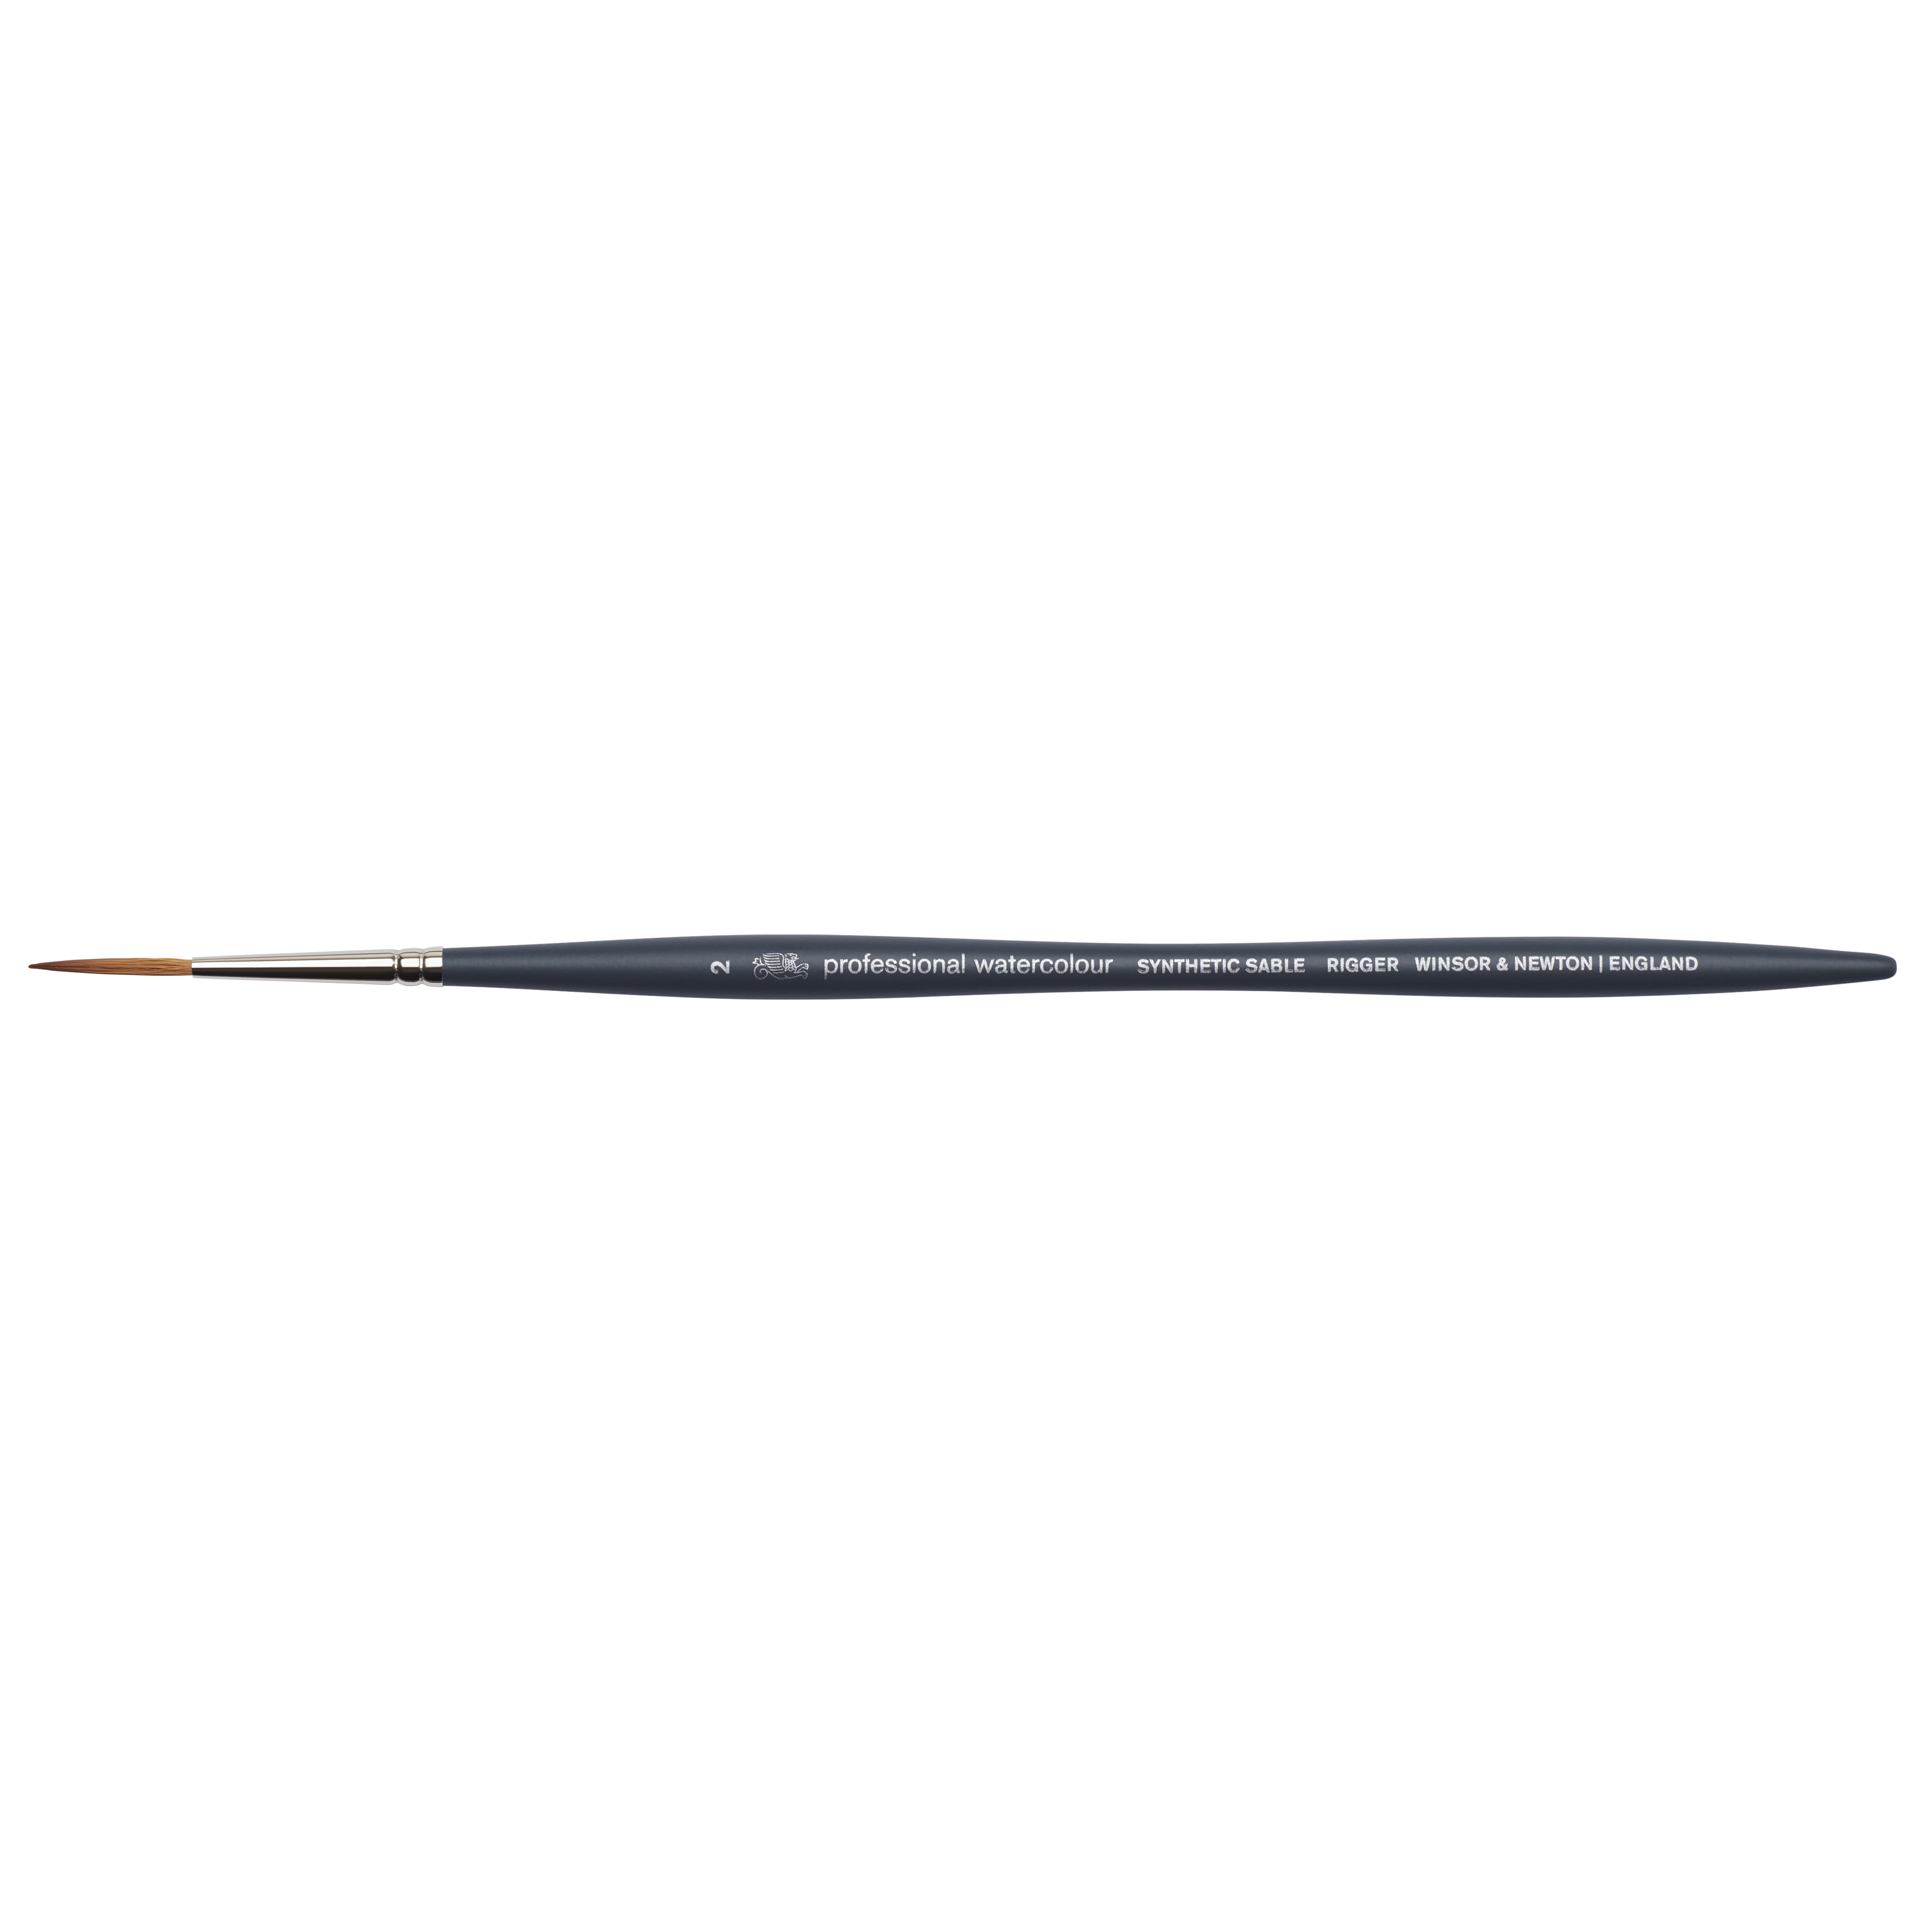 Winsor & Newton Professional Watercolour Synthetic Sable, Rigger Brush - Size 2